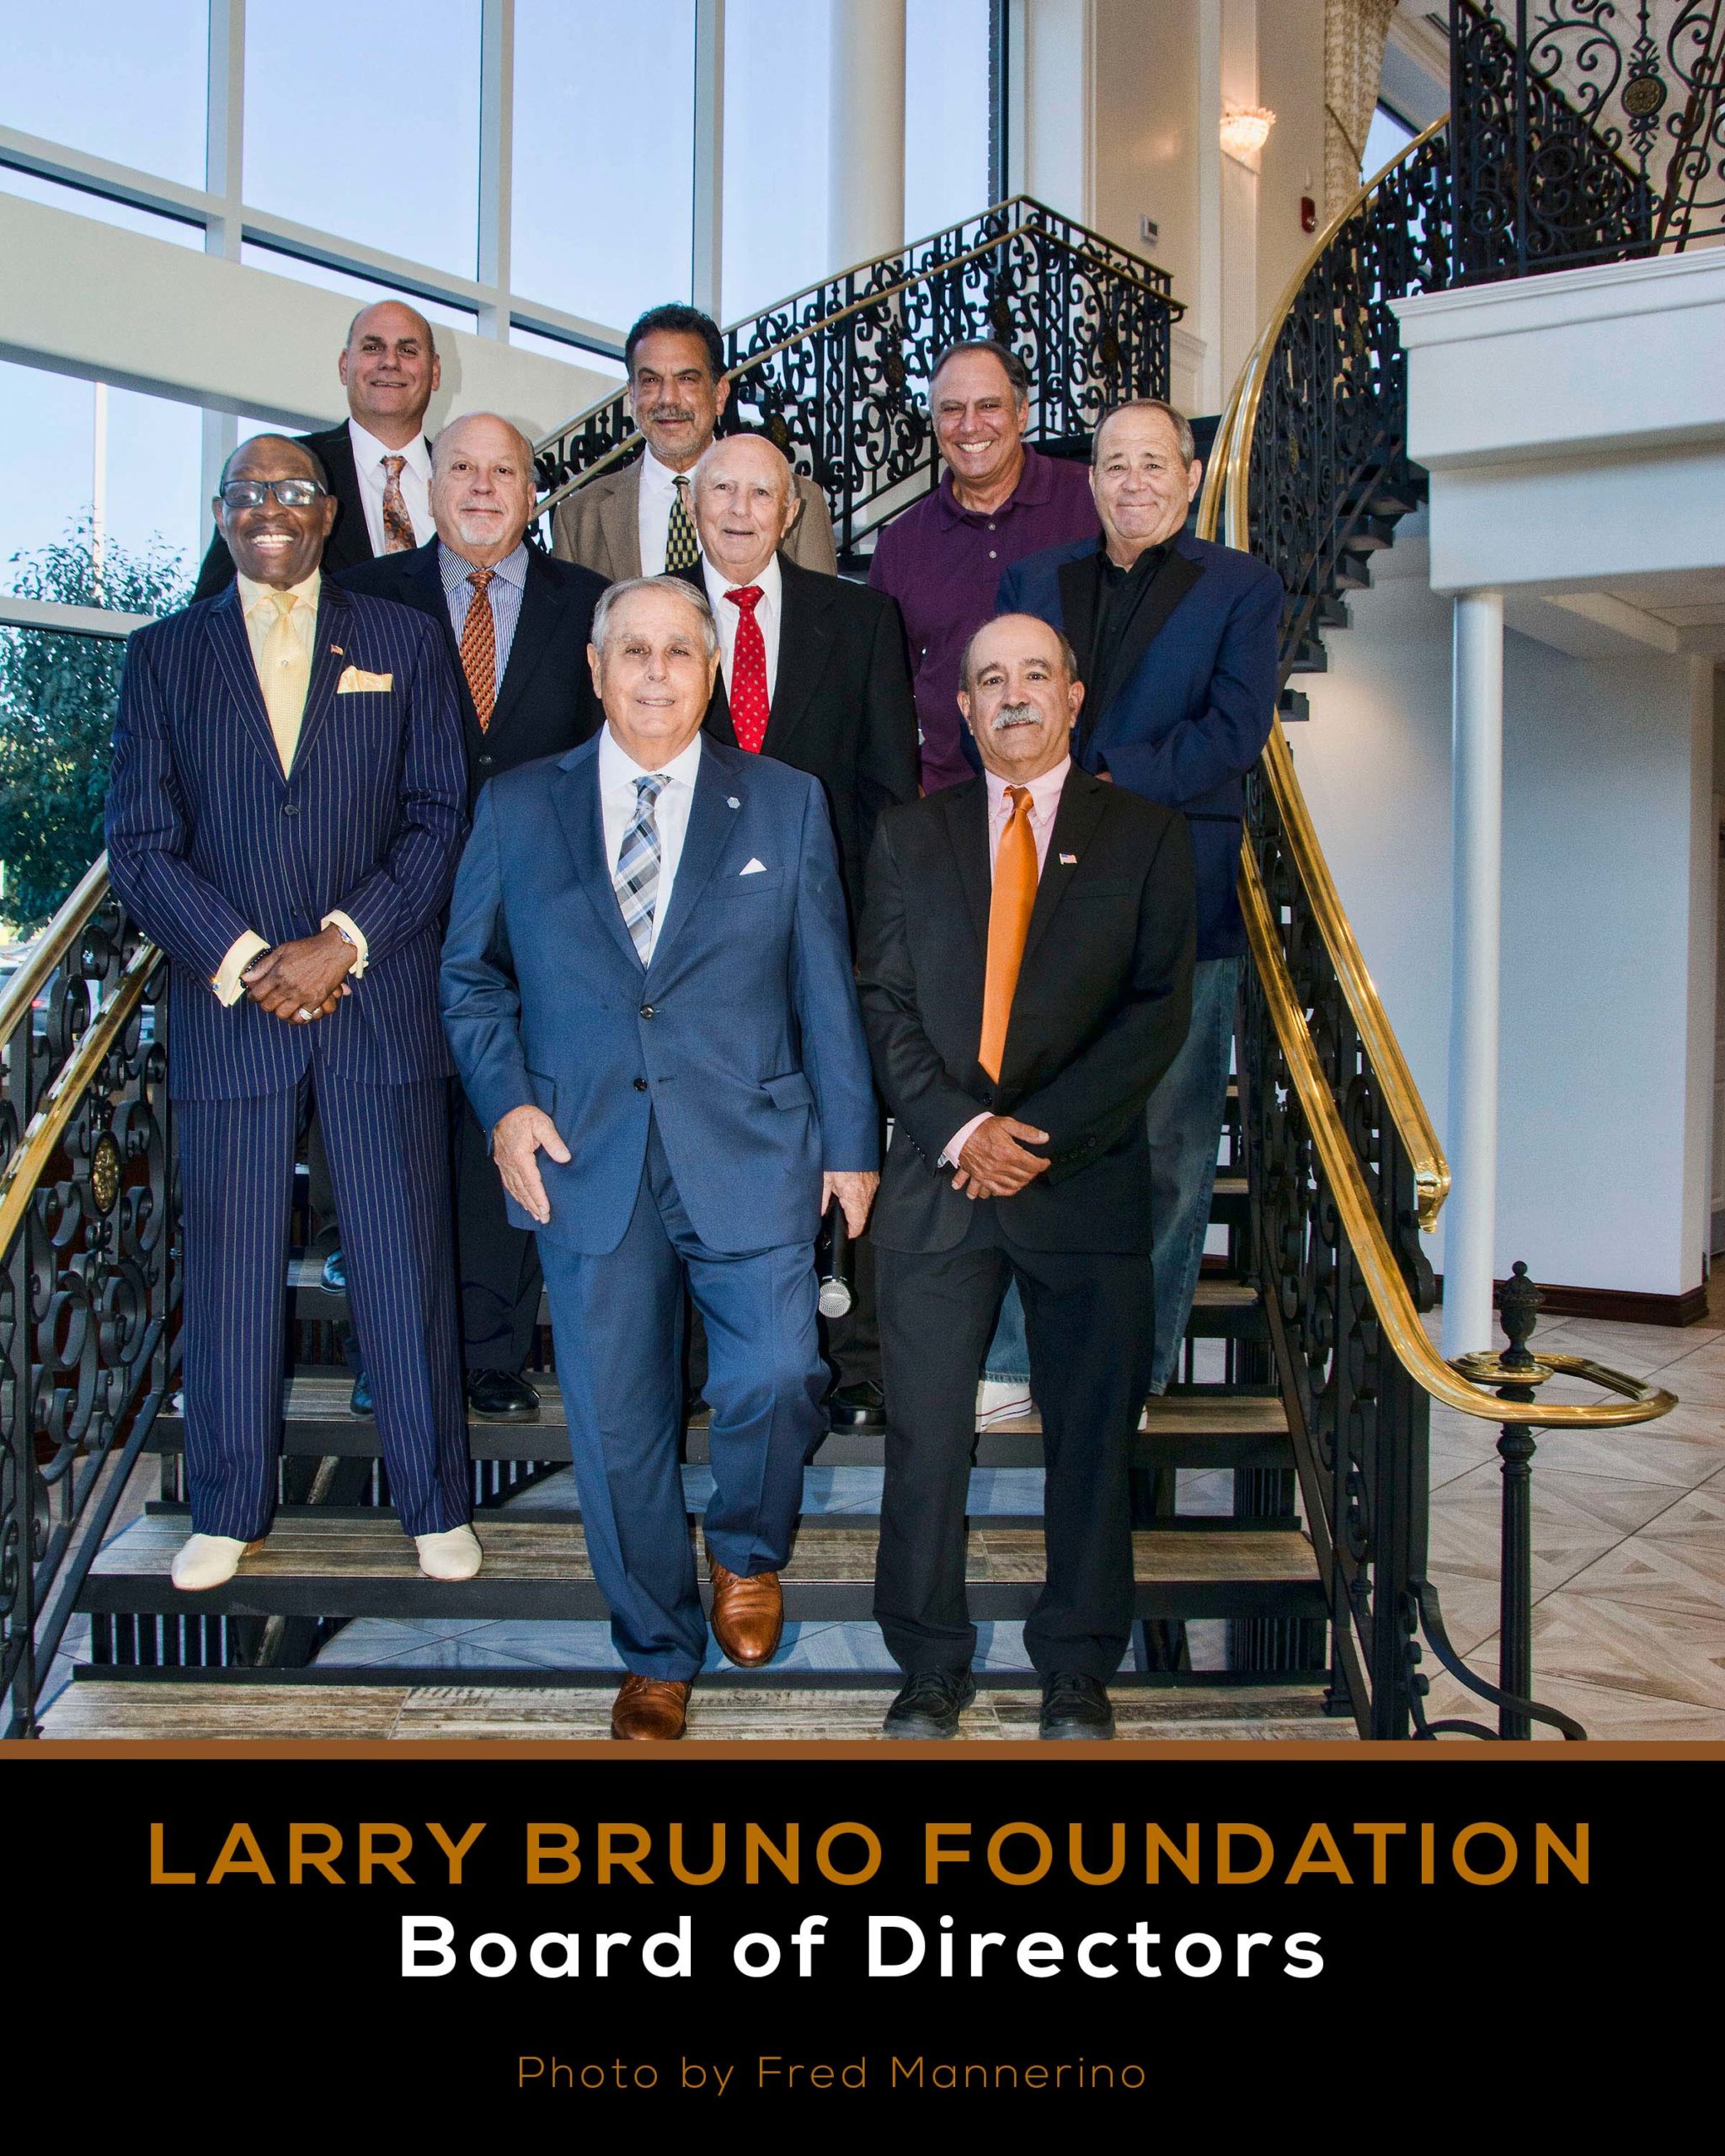 Larry Bruno Foundation Board Members for 2021